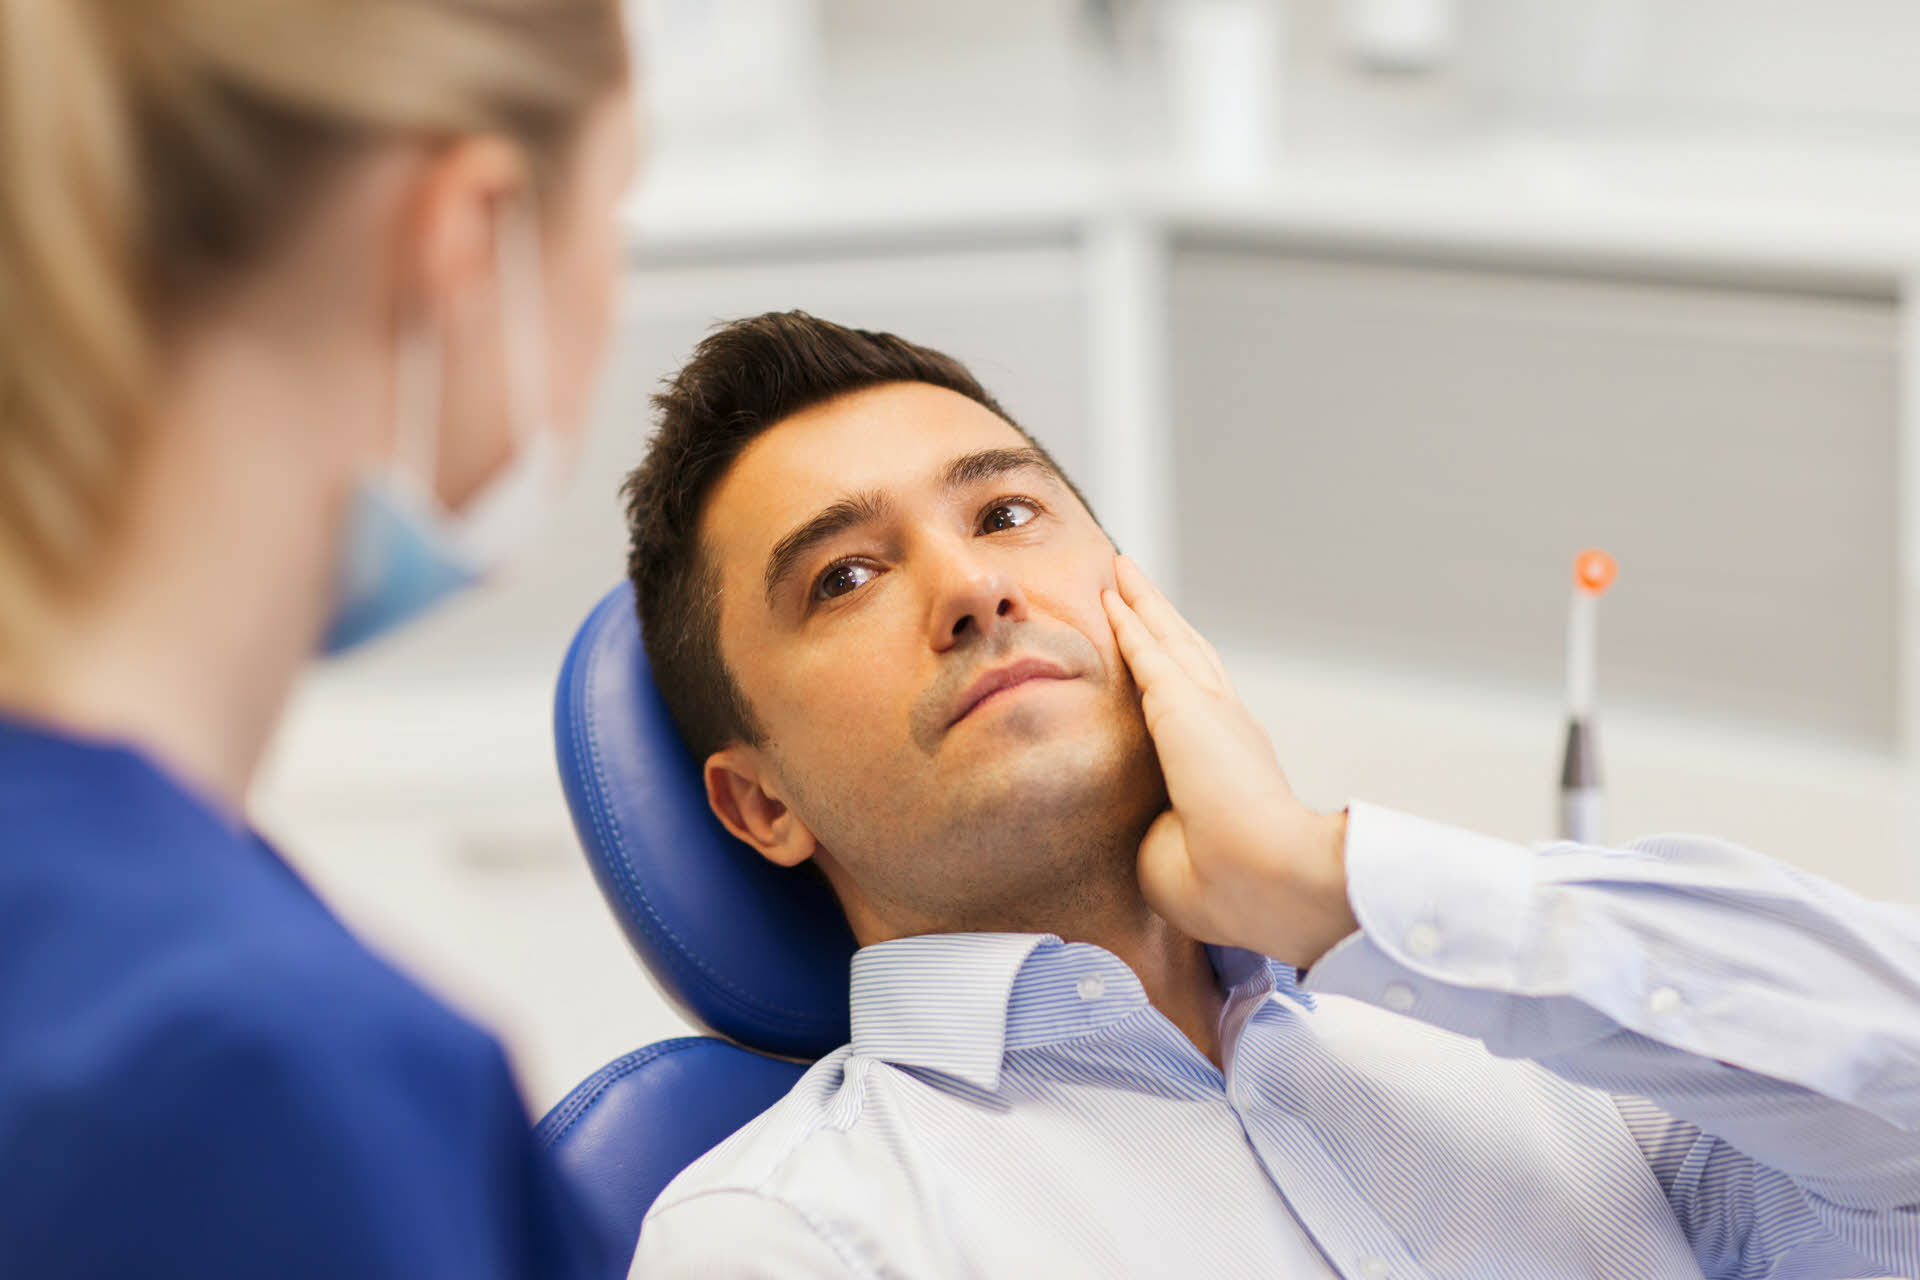 Tooth or mouth pain? Our dentists use the most advanced technology to quickly diagnose your oral pain.